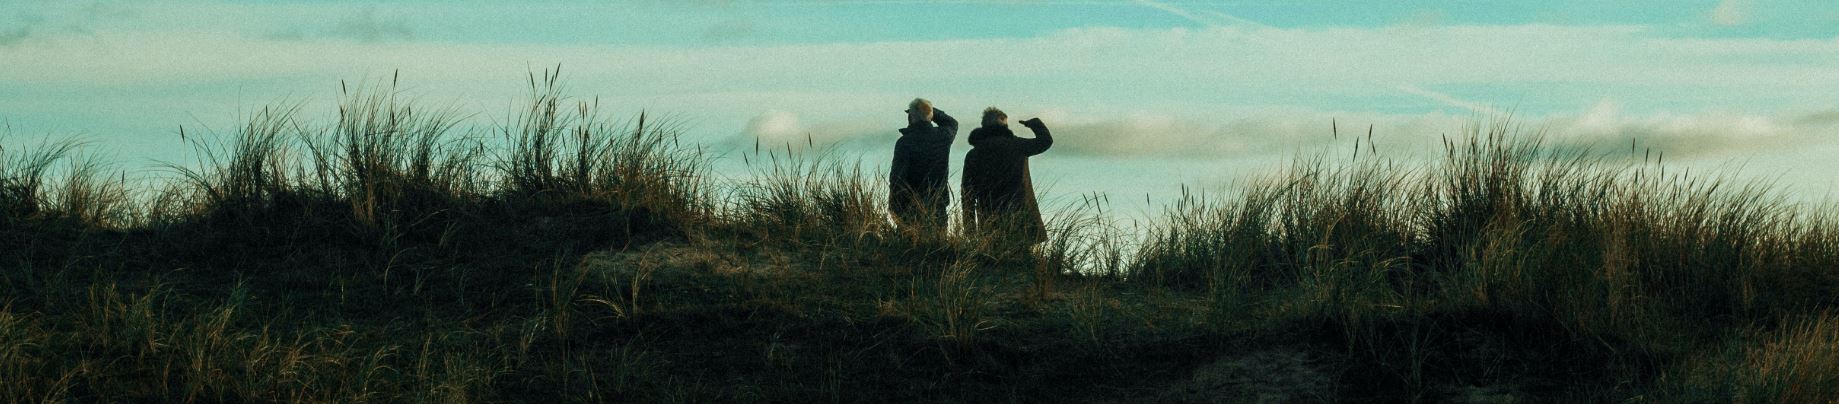 Image of two people in a field dreaming